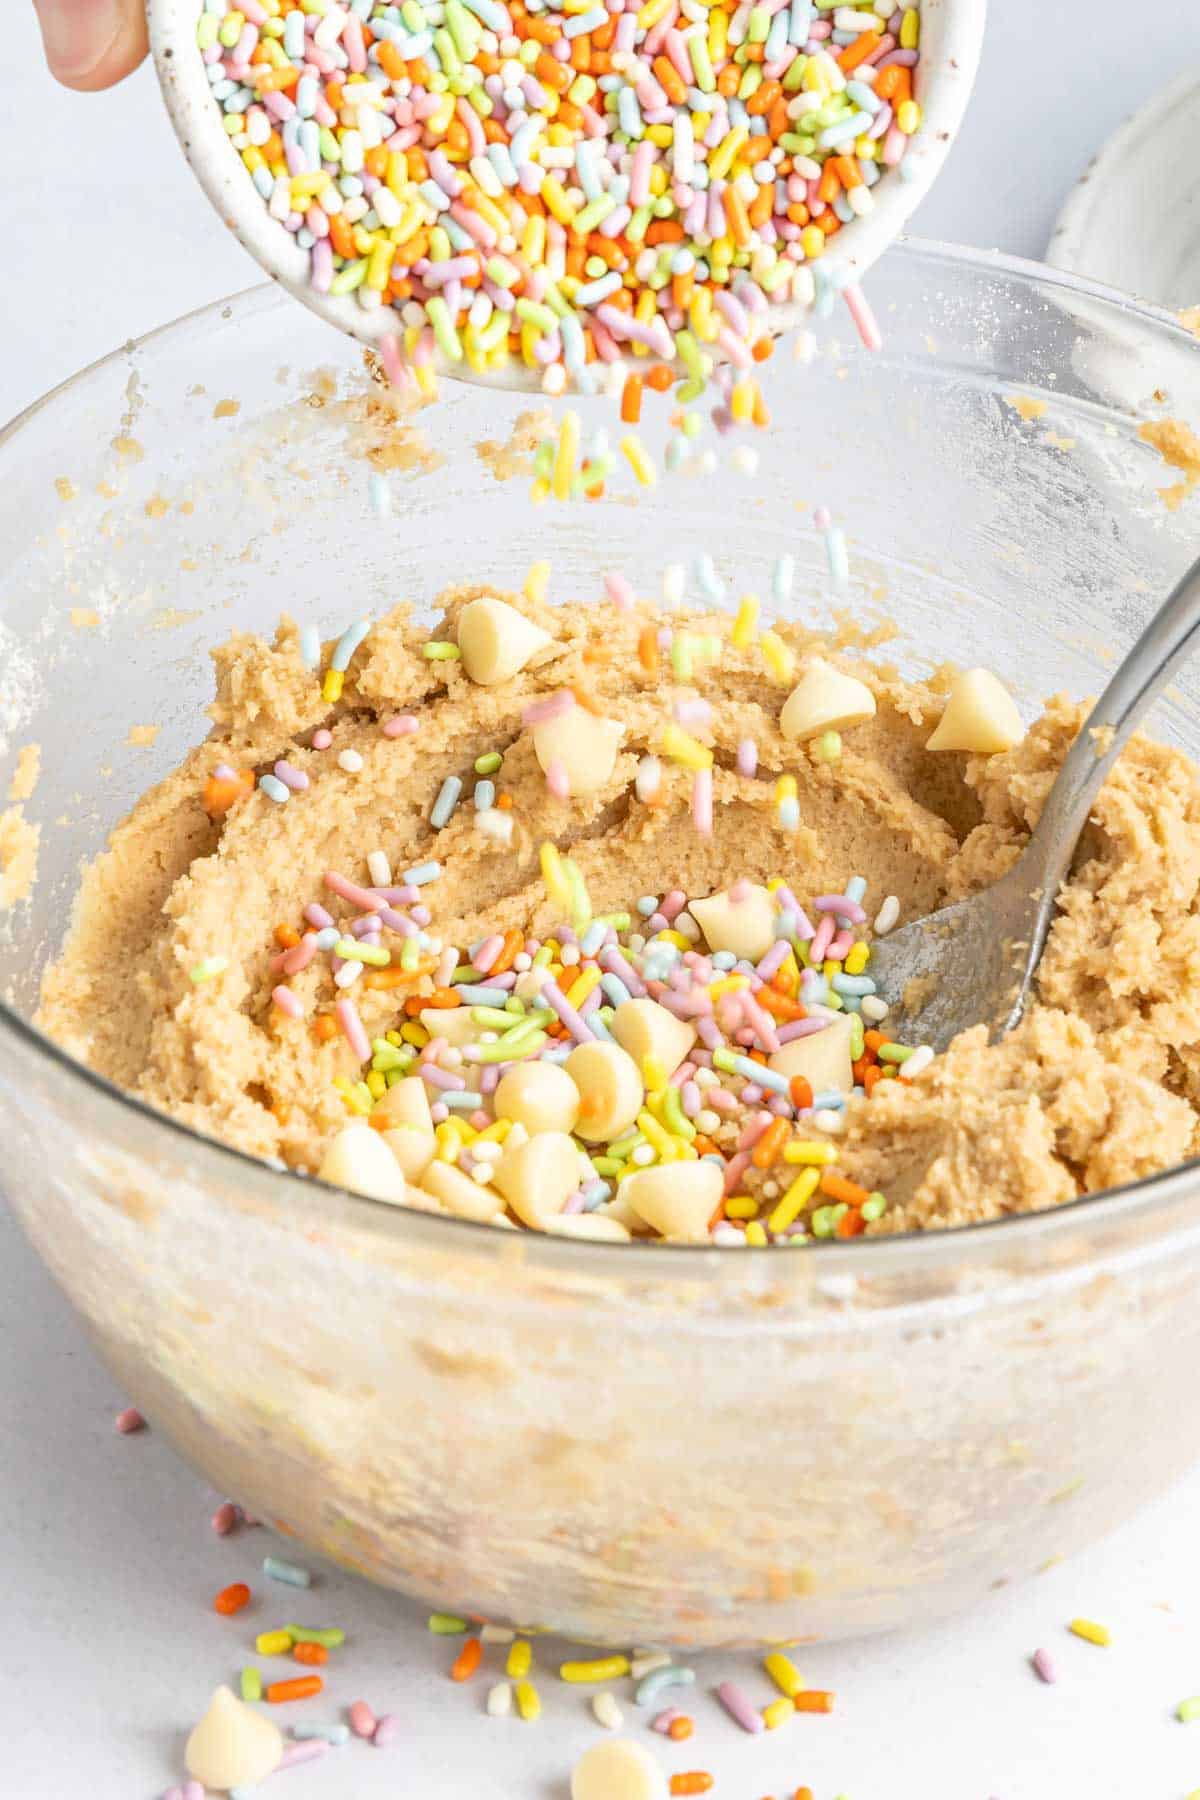 Sprinkles are poured into a glass mixing bowl full of cookie dough mixed with white chocolate chips..